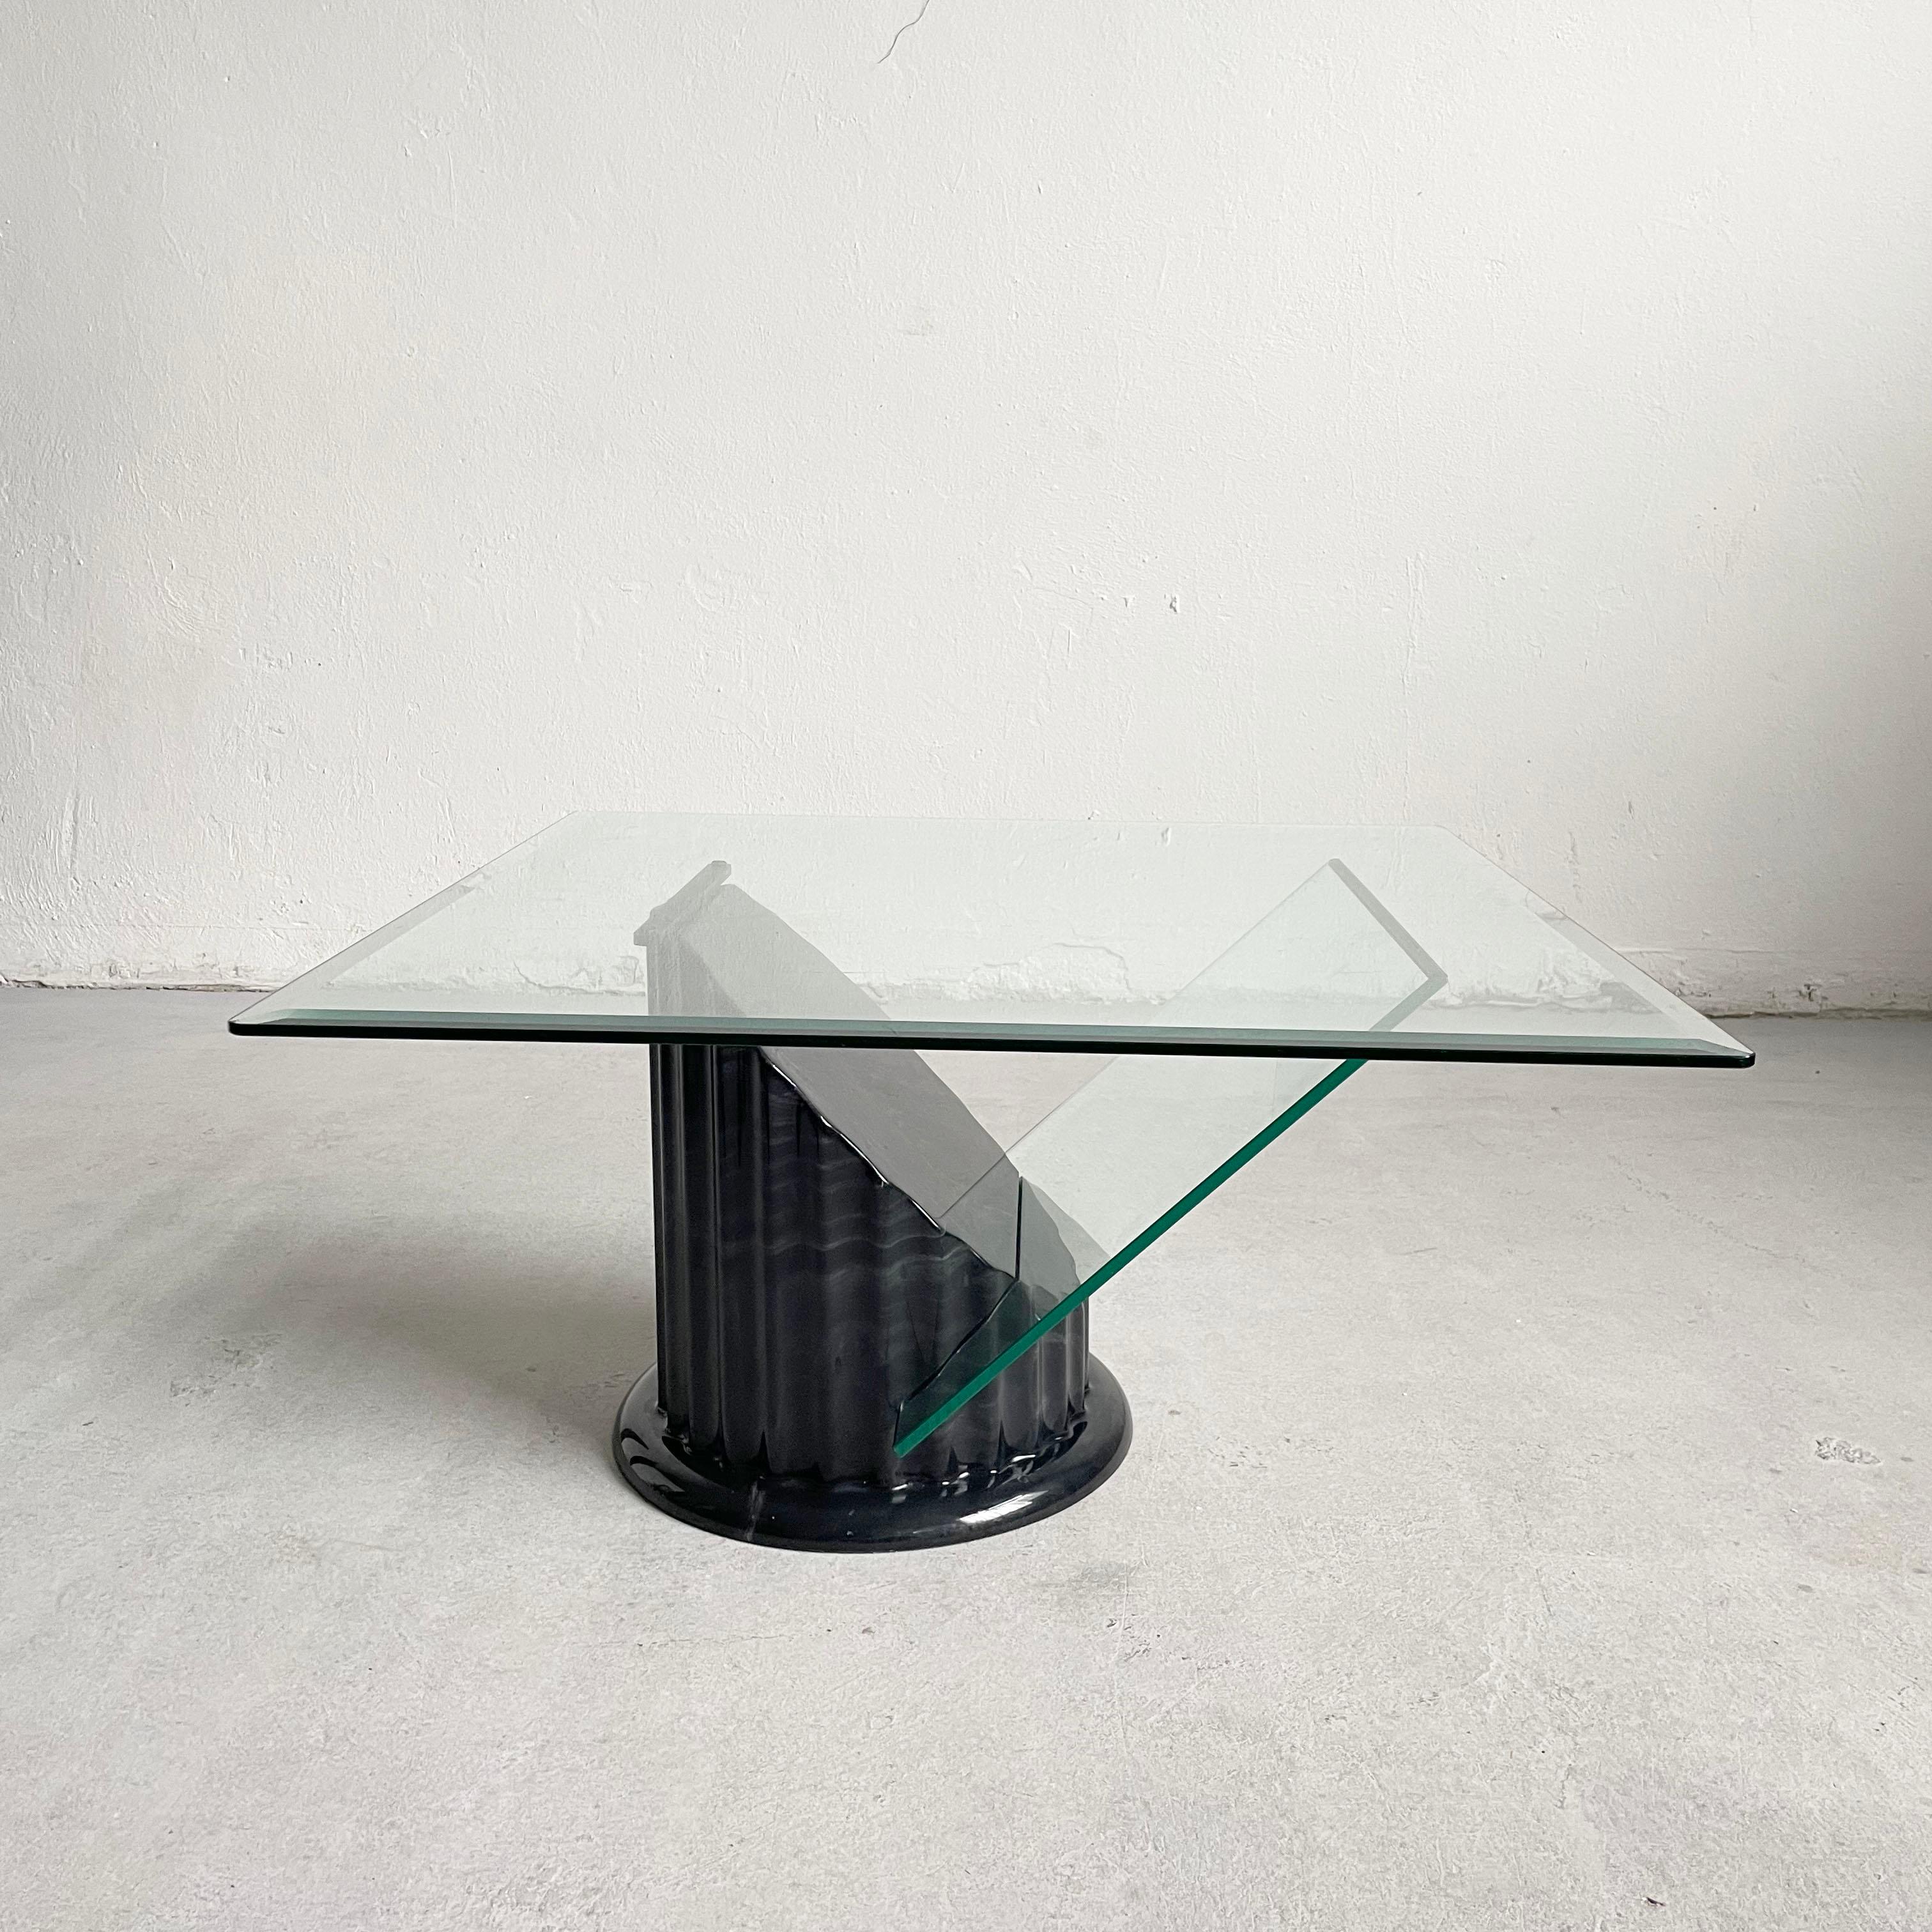 Postmodern Sculptural Coffee Table, Black Faux Marble and Glass, 1980s For Sale 2